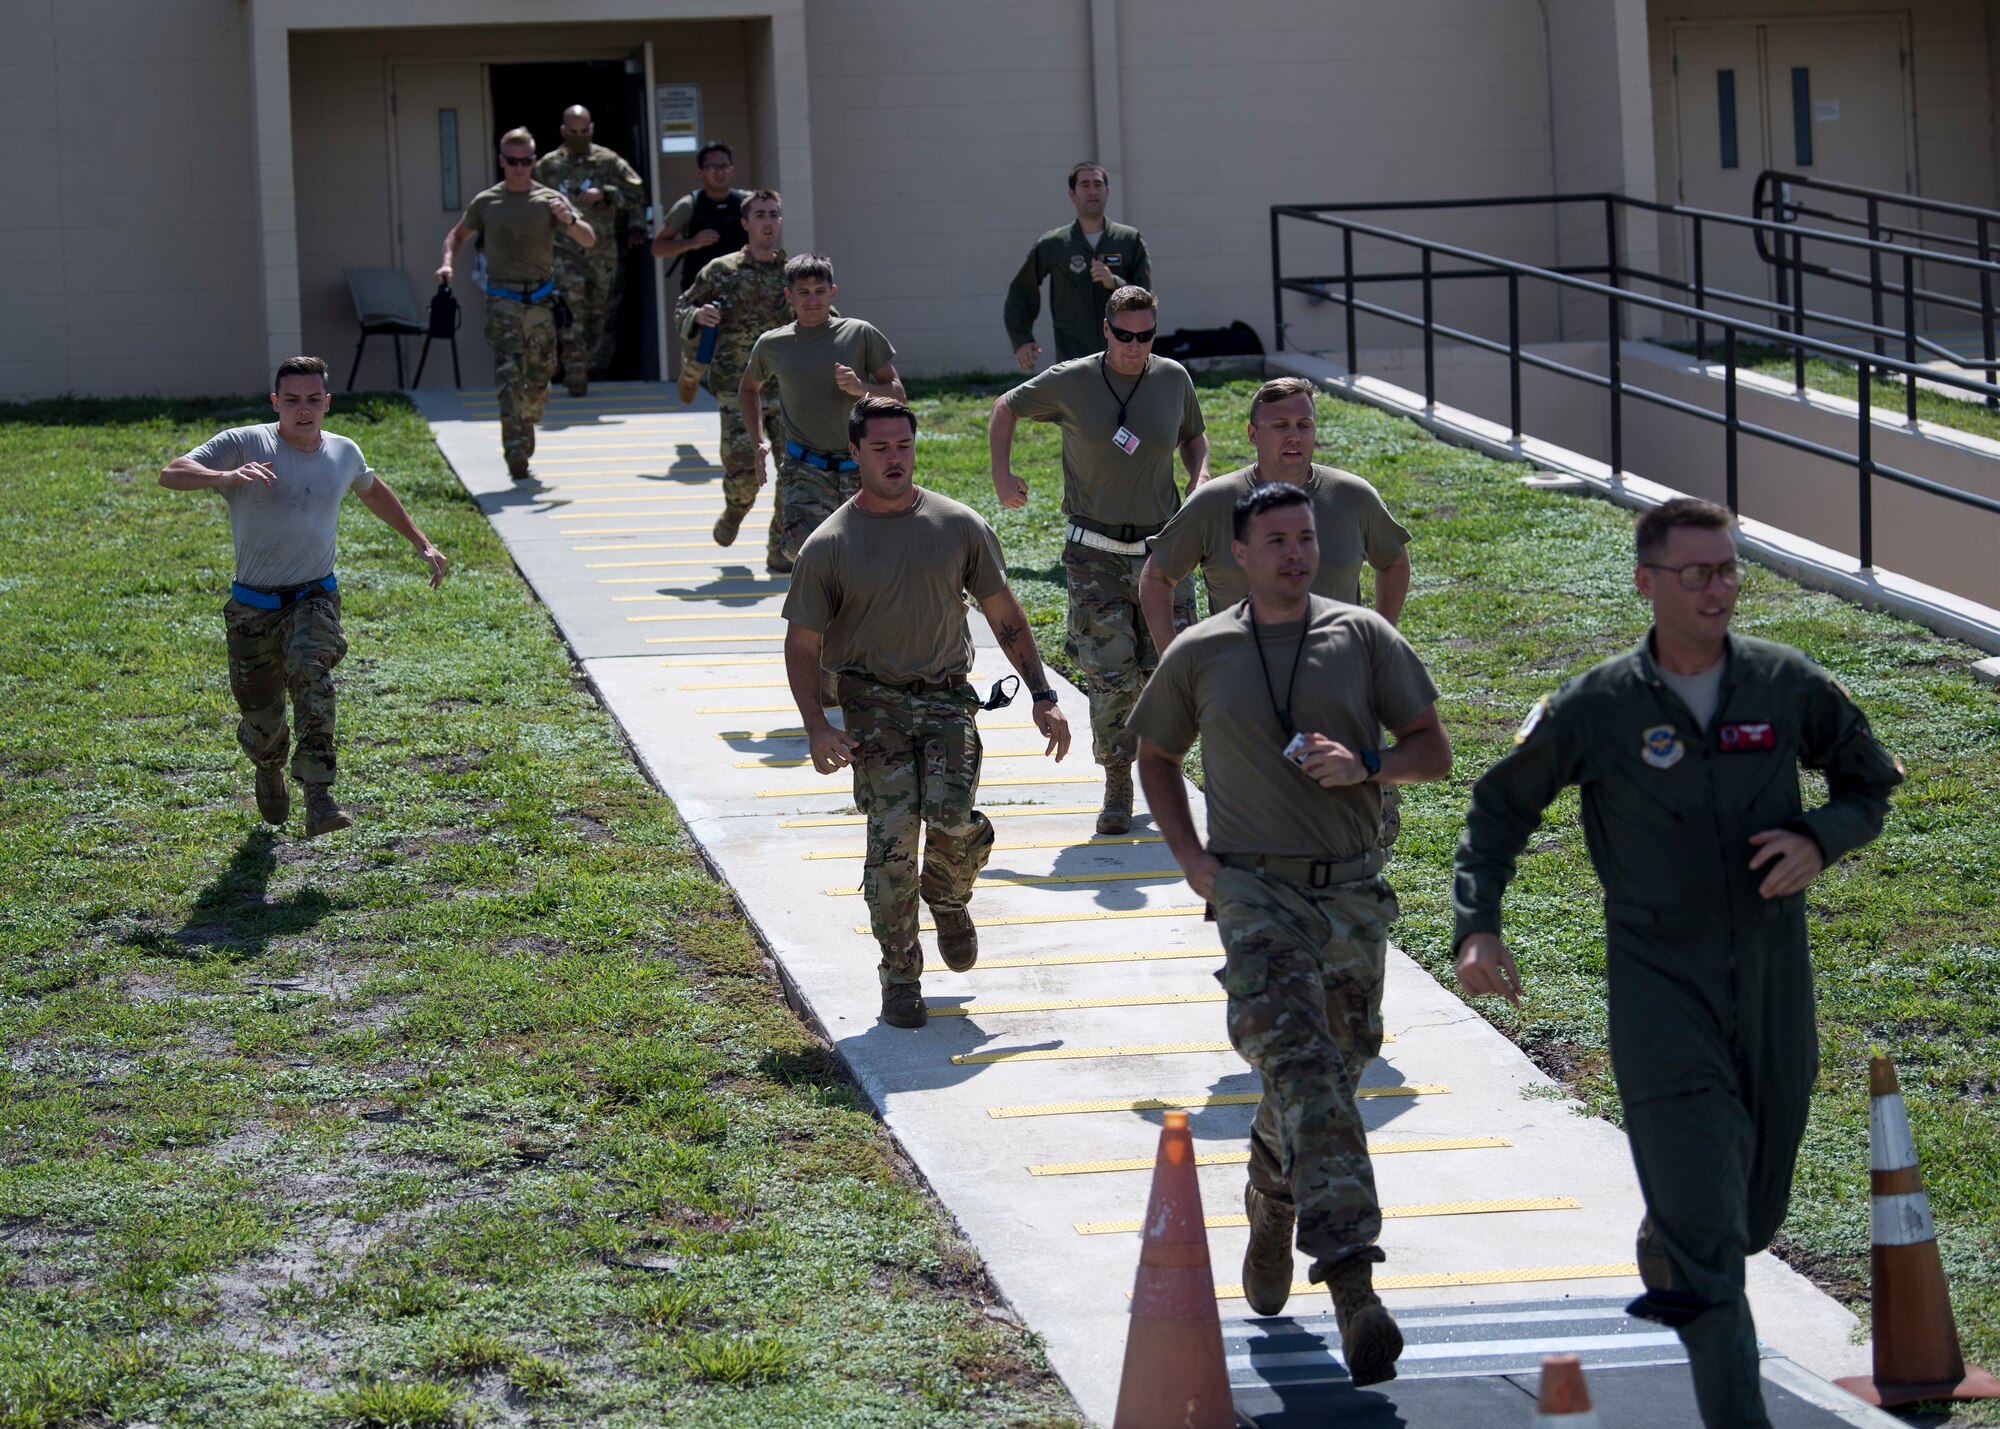 Members of Team MacDill sprint from the alert facility during a joint training exercise at MacDill Air Force Base, Fla., Aug. 29, 2020.